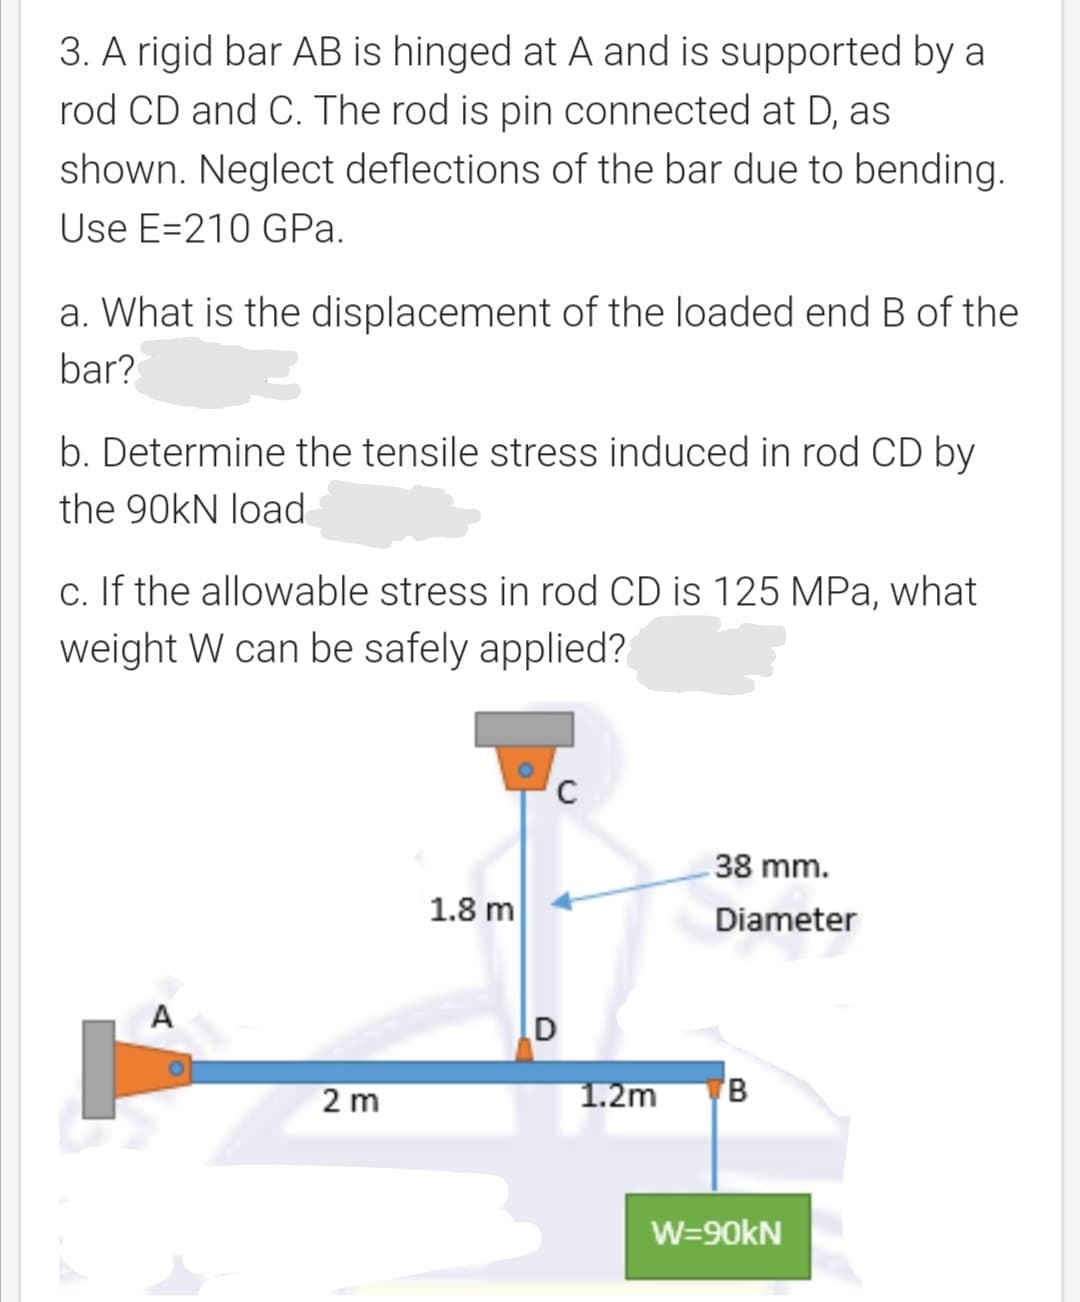 3. A rigid bar AB is hinged at A and is supported by a
rod CD and C. The rod is pin connected at D, as
shown. Neglect deflections of the bar due to bending.
Use E=210 GPa.
a. What is the displacement of the loaded end B of the
bar?
b. Determine the tensile stress induced in rod CD by
the 90KN loạd
c. If the allowable stress in rod CD is 125 MPa, what
weight W can be safely applied?
C
38 mm.
1.8 m
Diameter
A
2 m
1.2m
W=90KN
